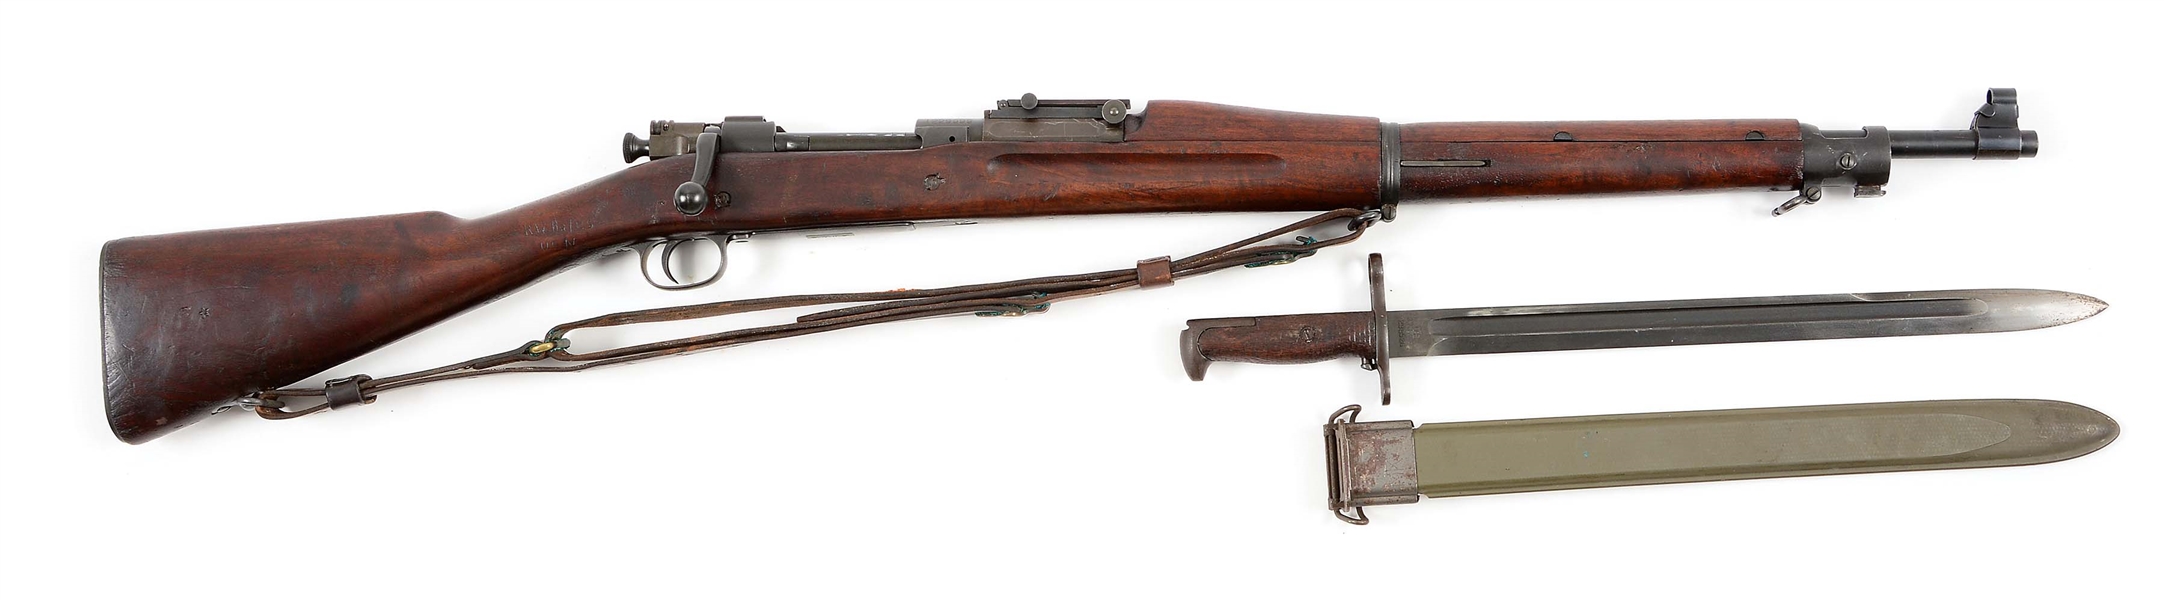 (C) US MILITARY SPRINGFIELD 1903 RIFLE, DATED 5-21 WITH BAYONET.